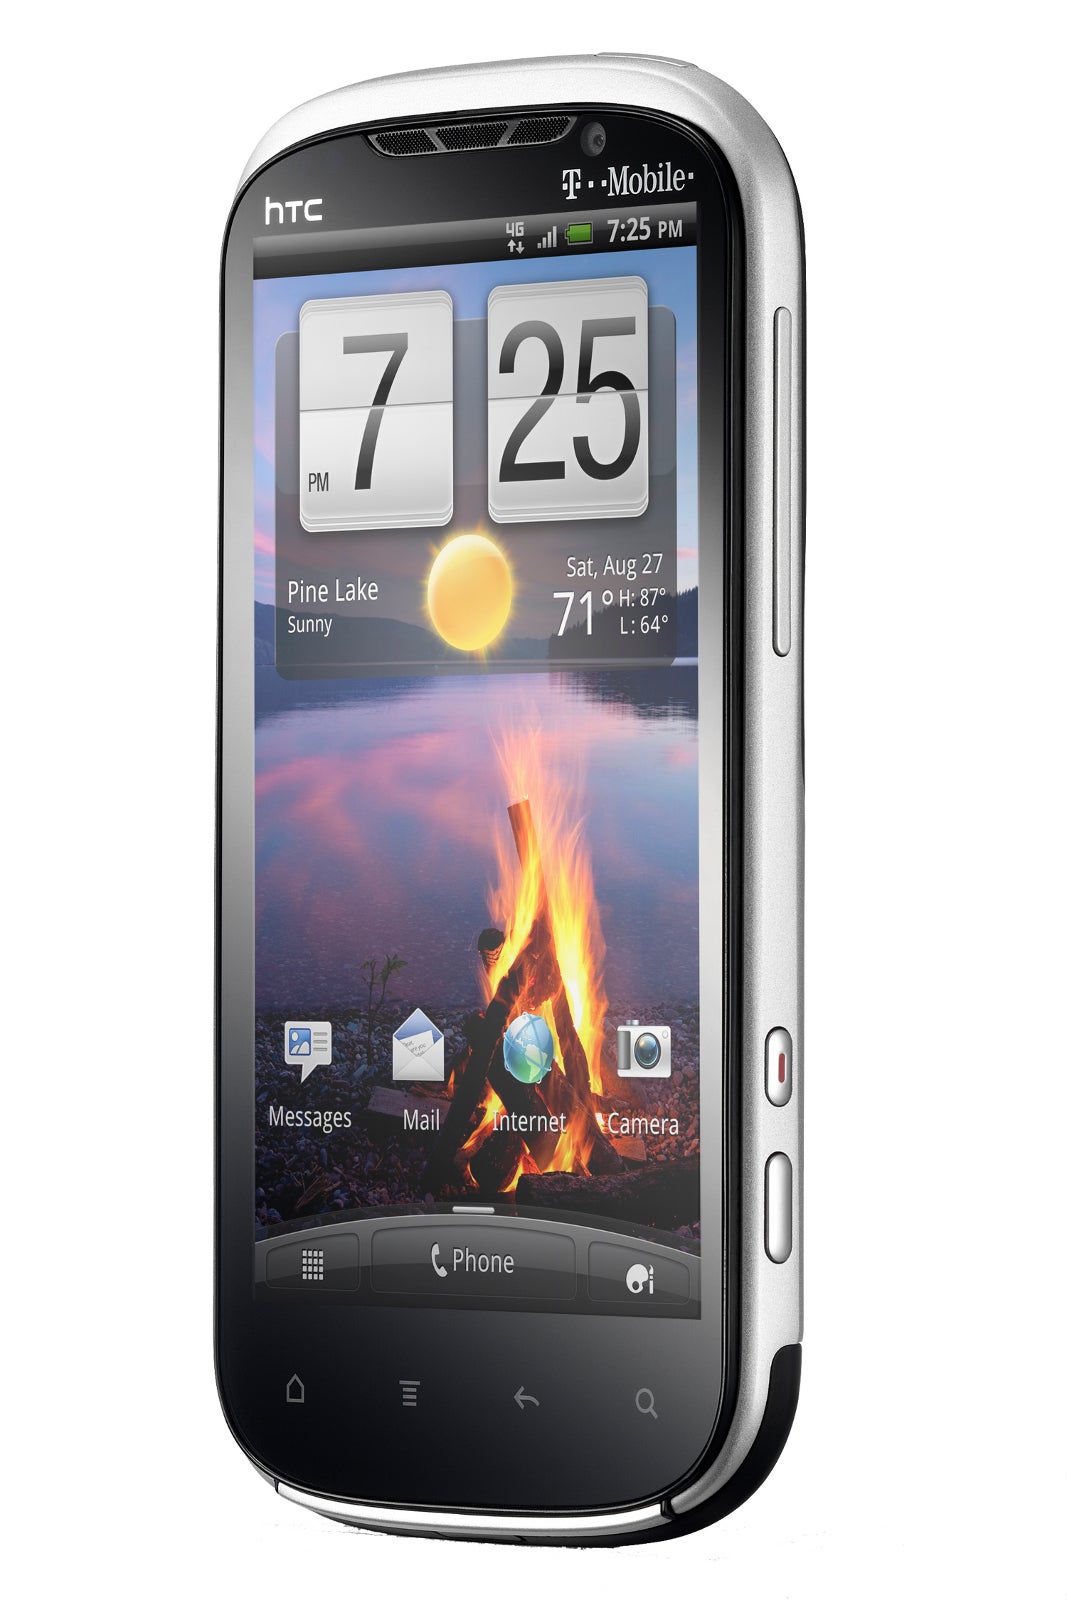 HTC Amaze 4G - T-Mobile officially announces the release date for the HTC Amaze 4G and Samsung Galaxy S II